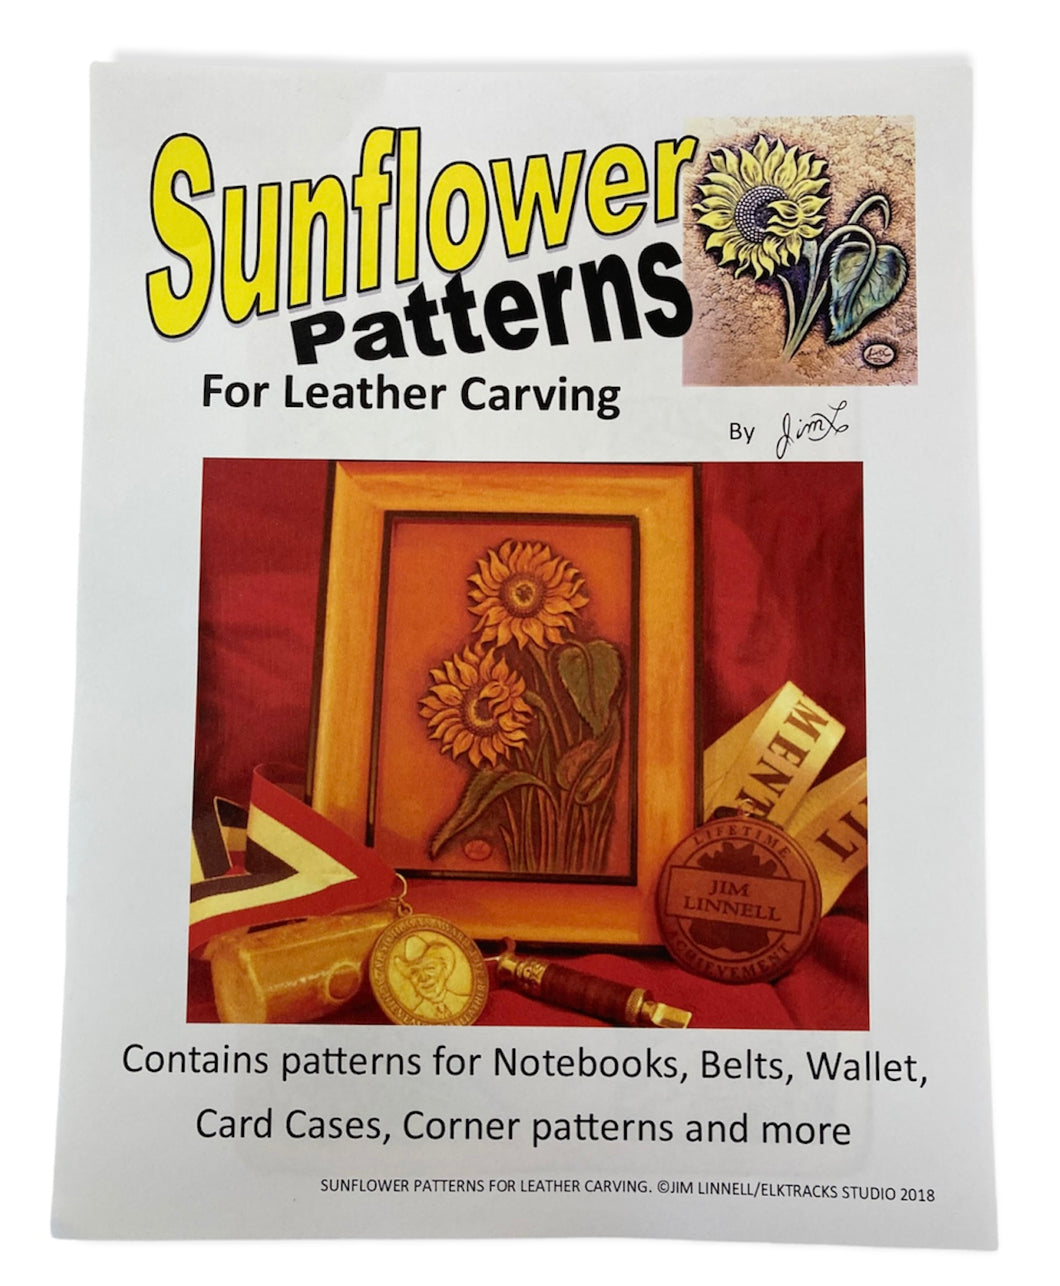 Sunflower Patterns for Leather Carving